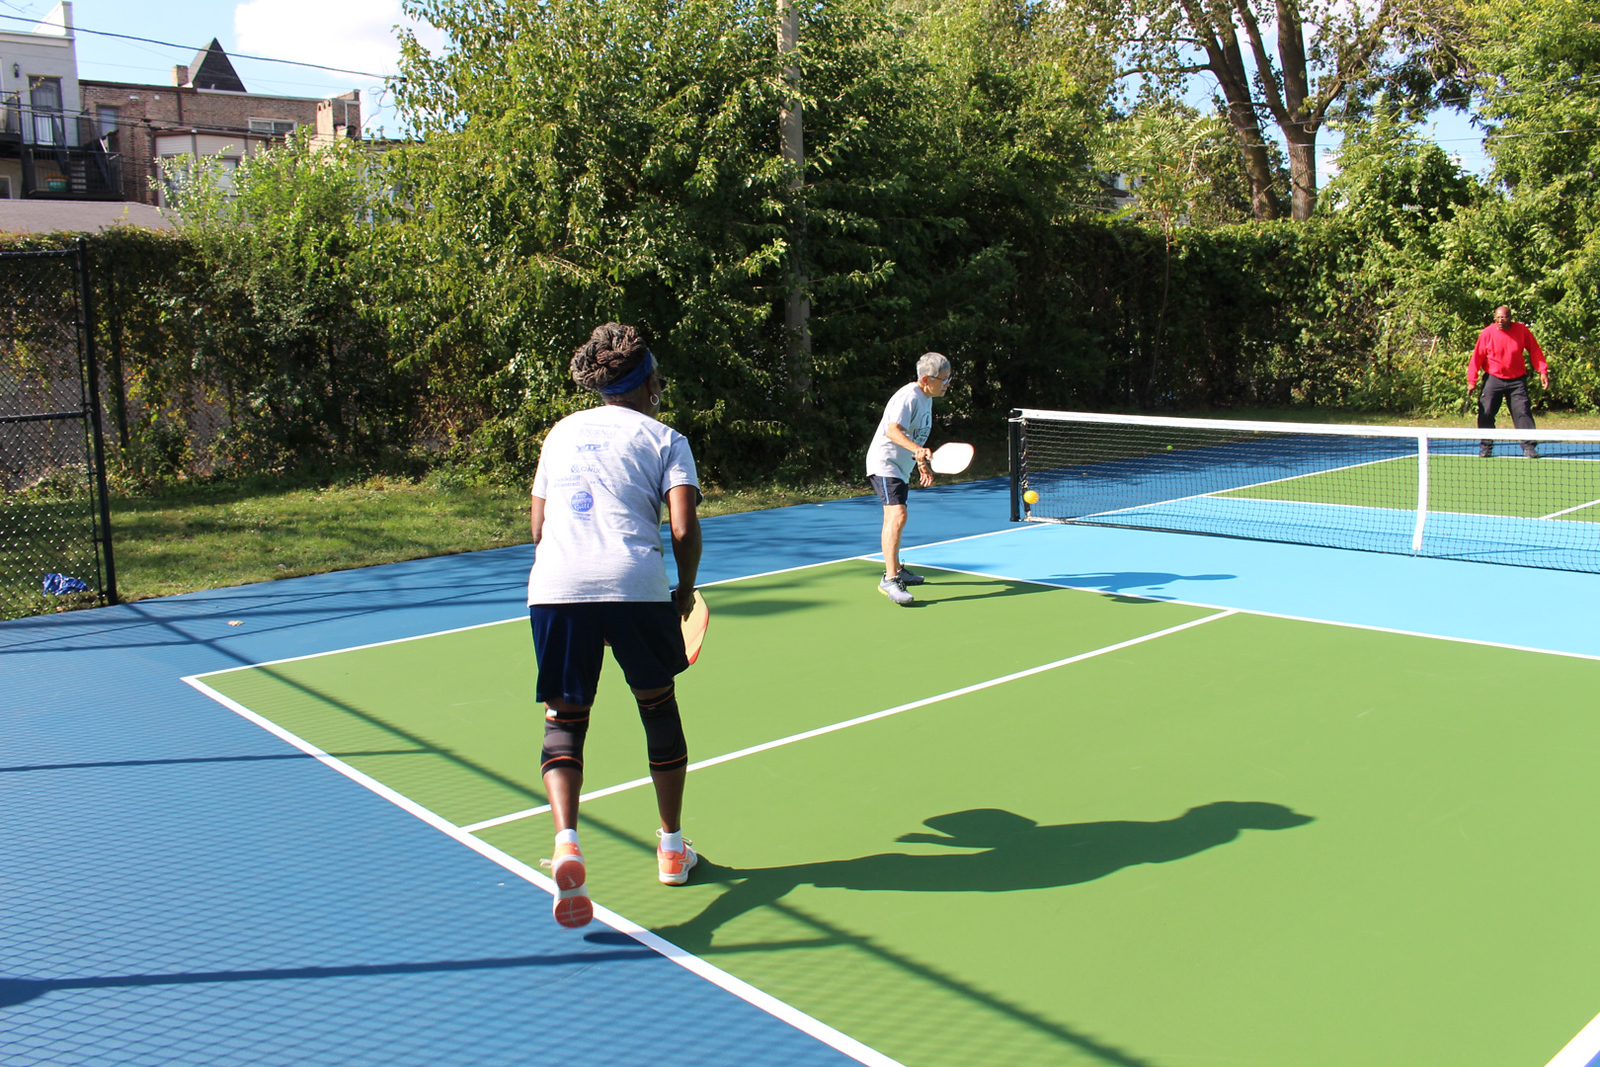 50 New Pickleball Courts Coming To Chicago By 2025 As Interest In The